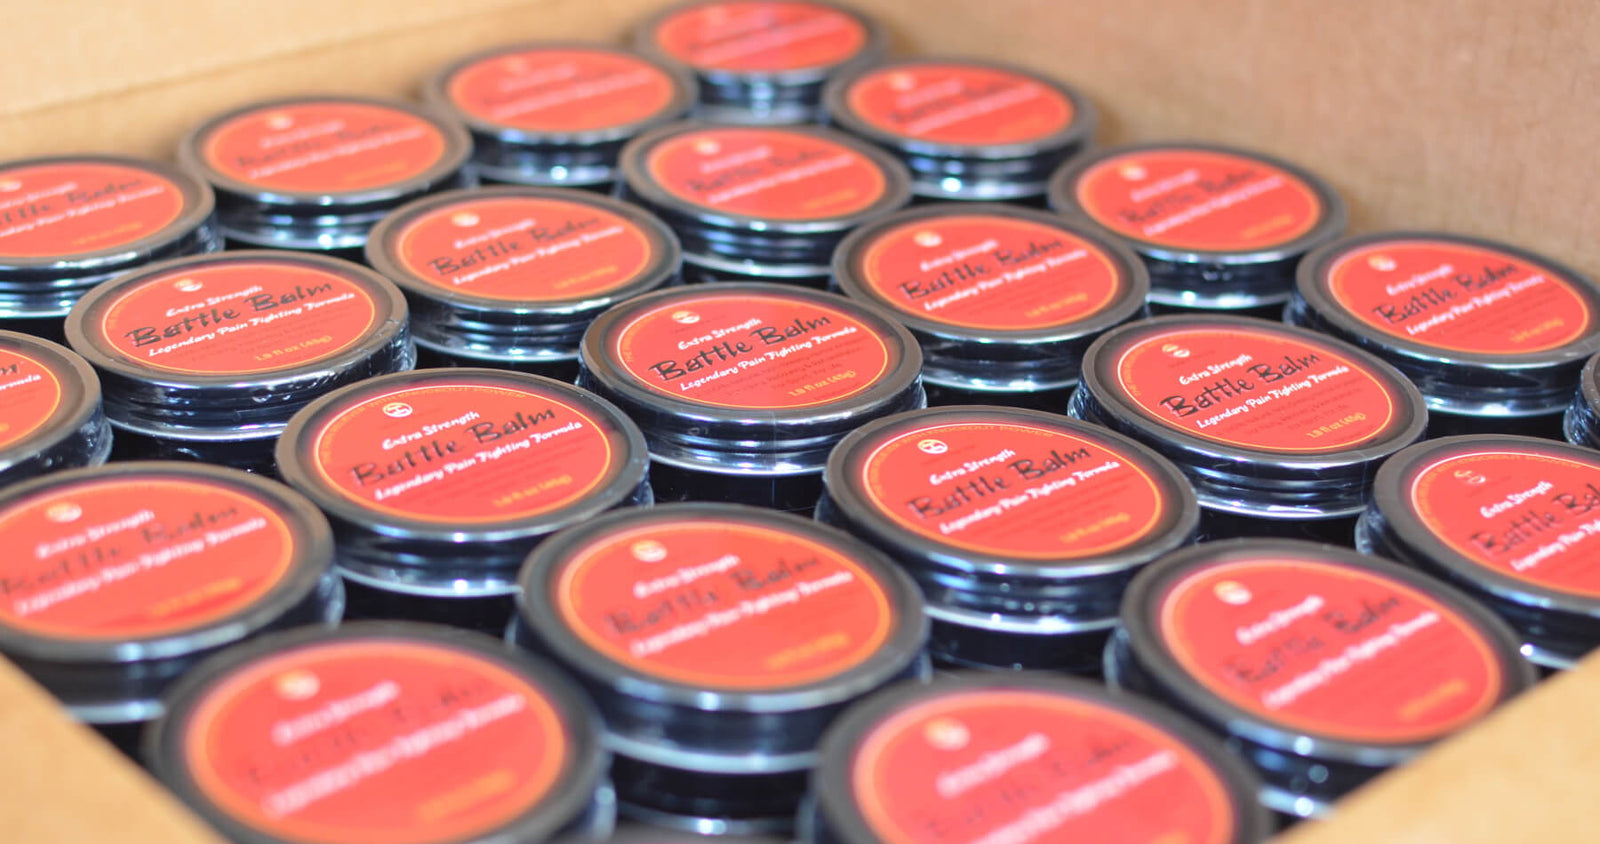 Buy Battle Balm wholesale and sell online or in your clinical practice! Open a wholesale account today!